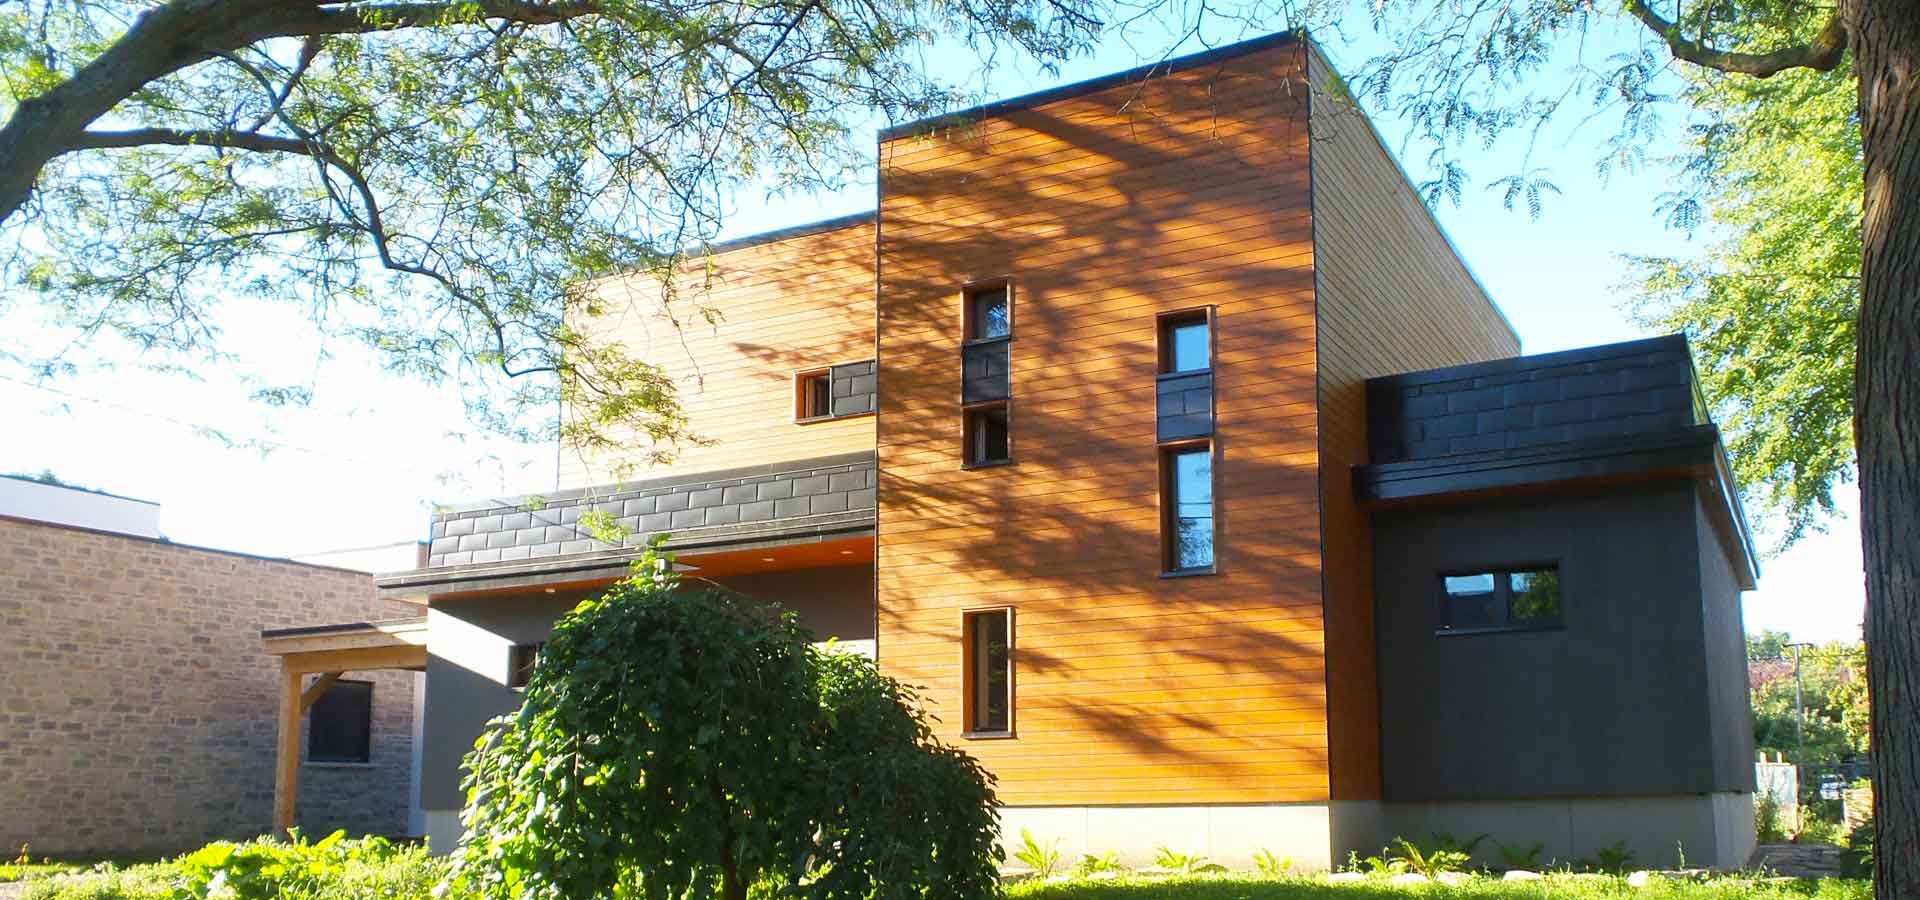 certified platinum leed and the first IPHA certified Passive House building in Quebec